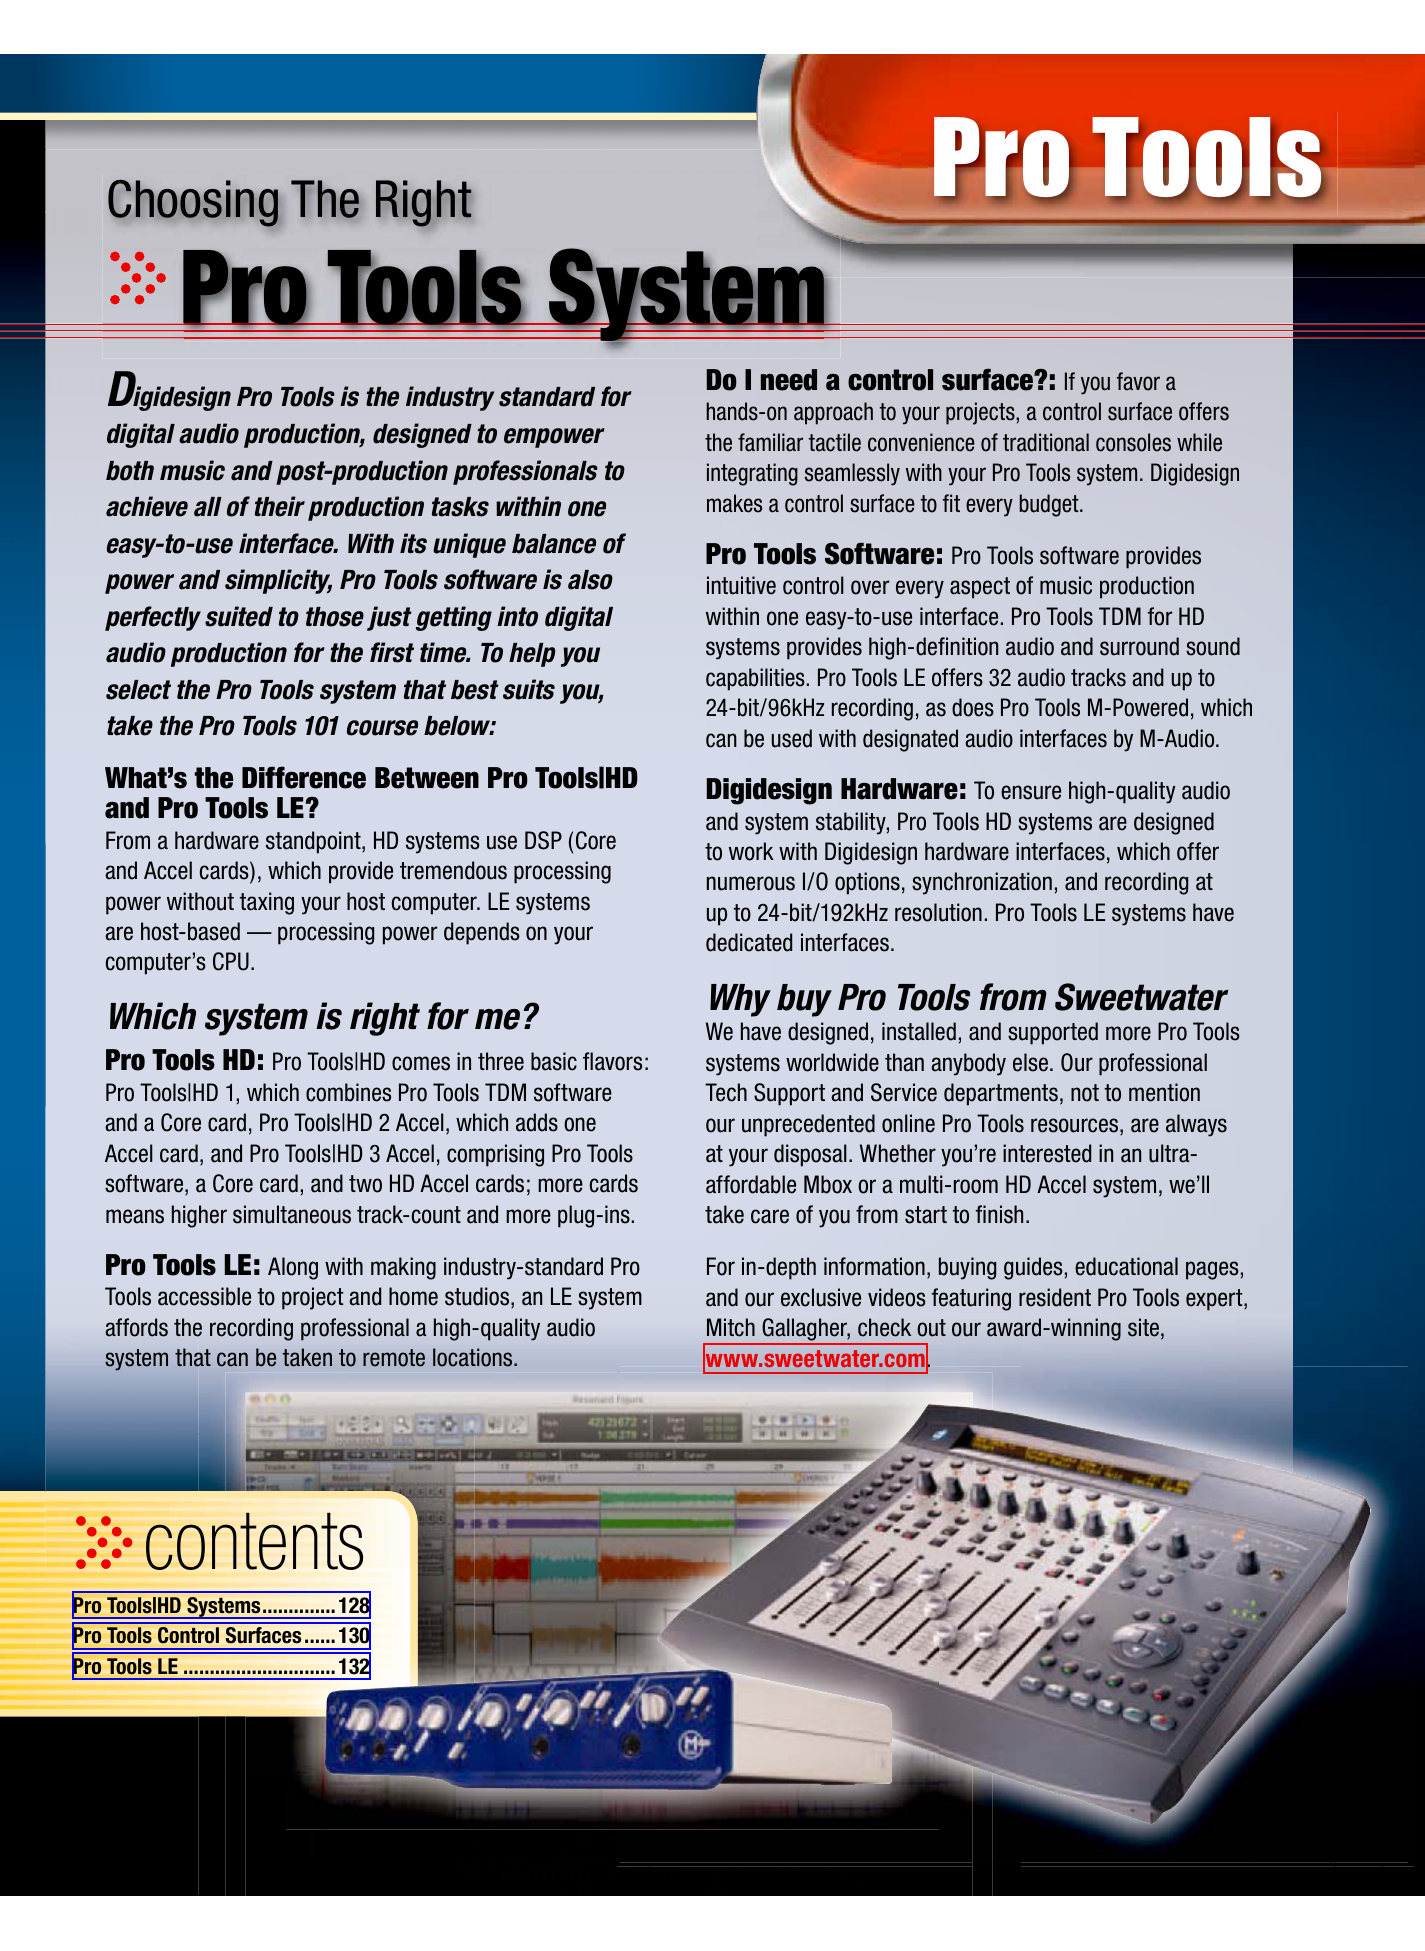 digidesign pro tools 8 software for pc and mac